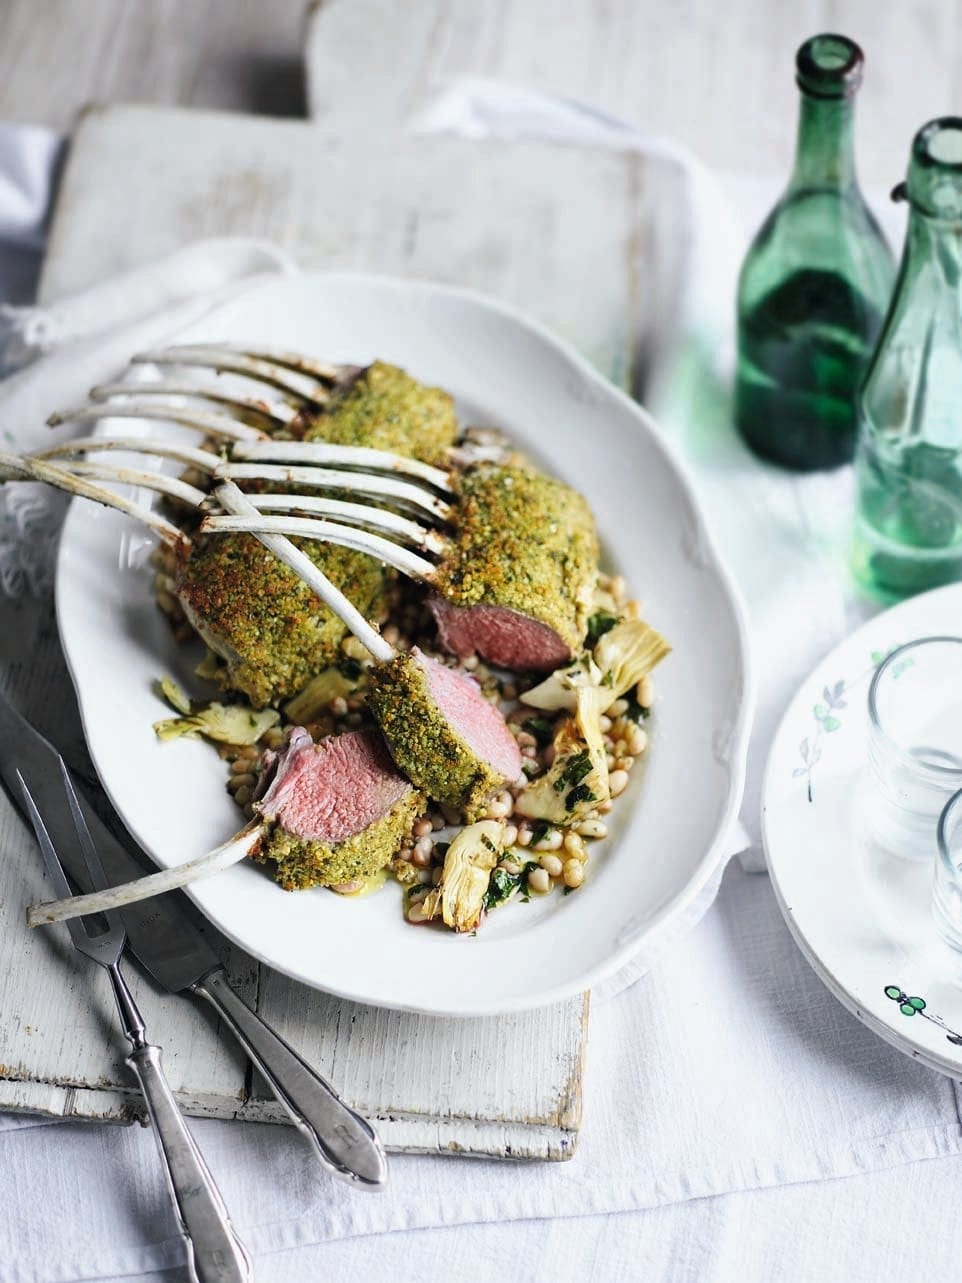 https://www.deliciousmagazine.co.uk/wp-content/uploads/2018/09/488999-1-eng-GB_herb-crusted-rack-of-lamb.jpg